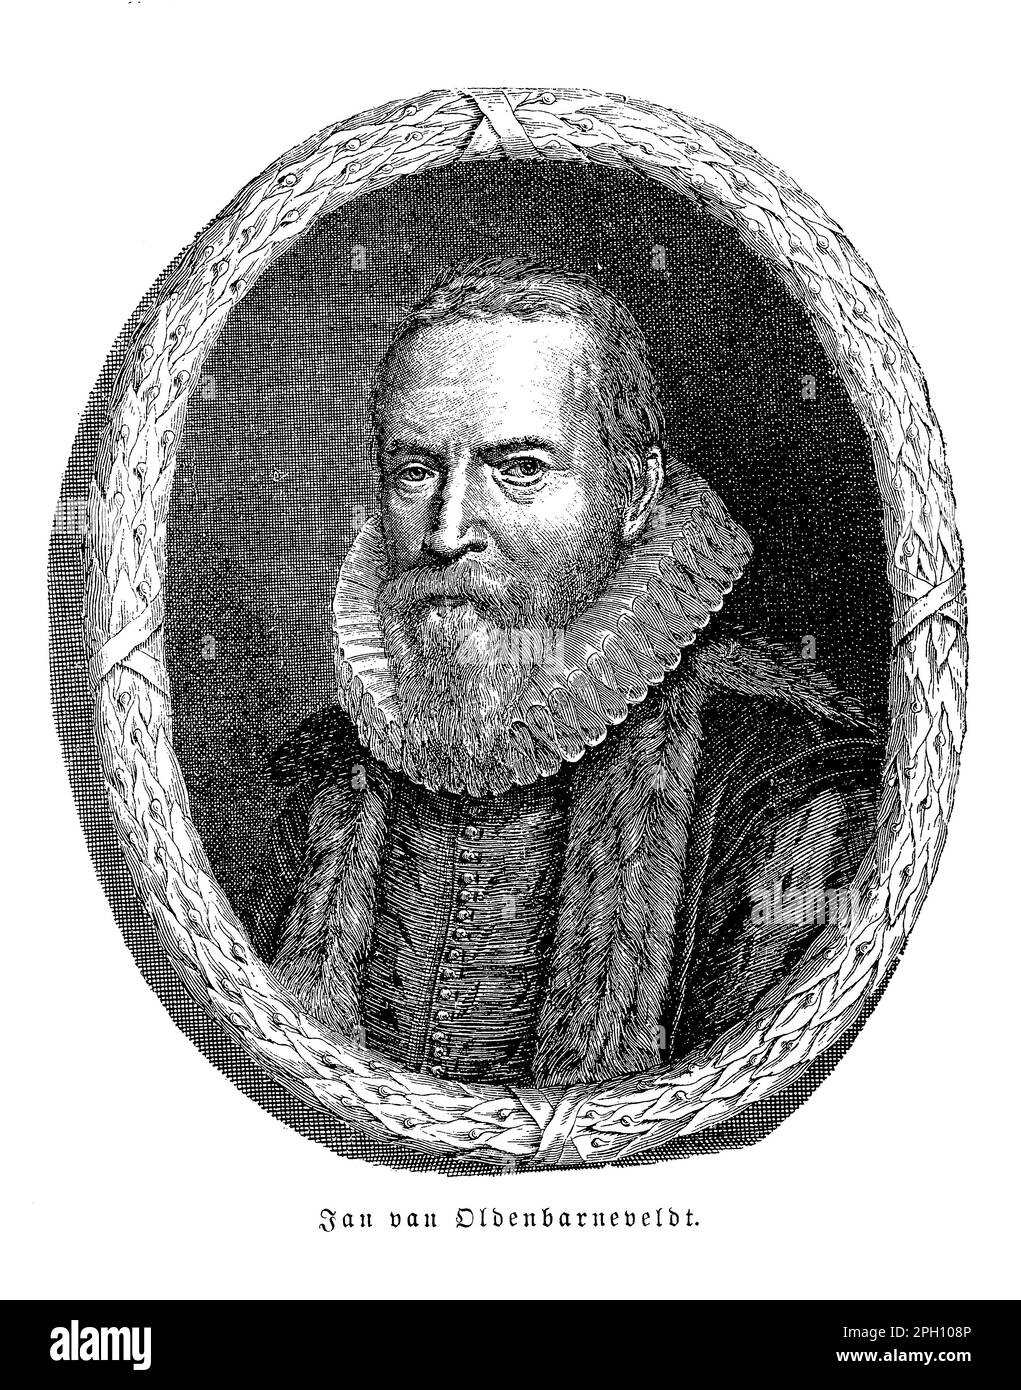 Jan van Oldenbarneveldt (1547-1619) was a Dutch statesman and one of the founding fathers of the Dutch Republic. He served as landsadvocaat (grand pensionary) for over 30 years, shaping Dutch politics and foreign relations. However, his conflict with Prince Maurits led to his arrest and execution. Stock Photo